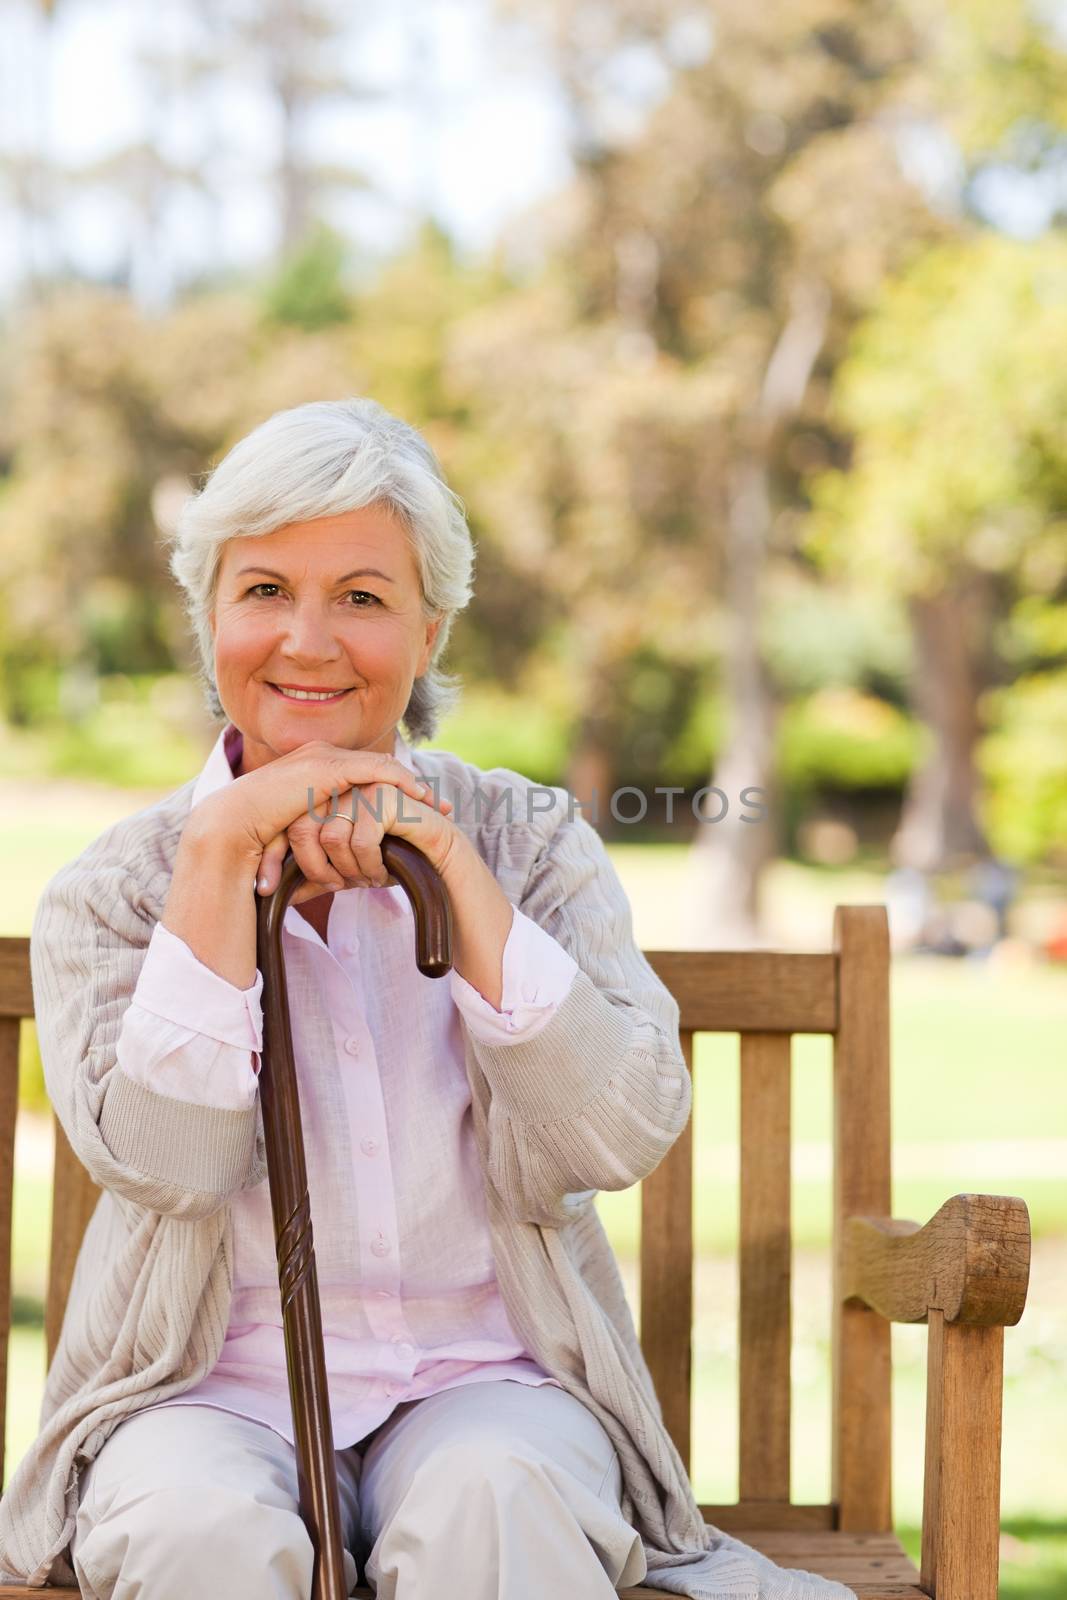 Woman with her walking stick in the park during the summer 